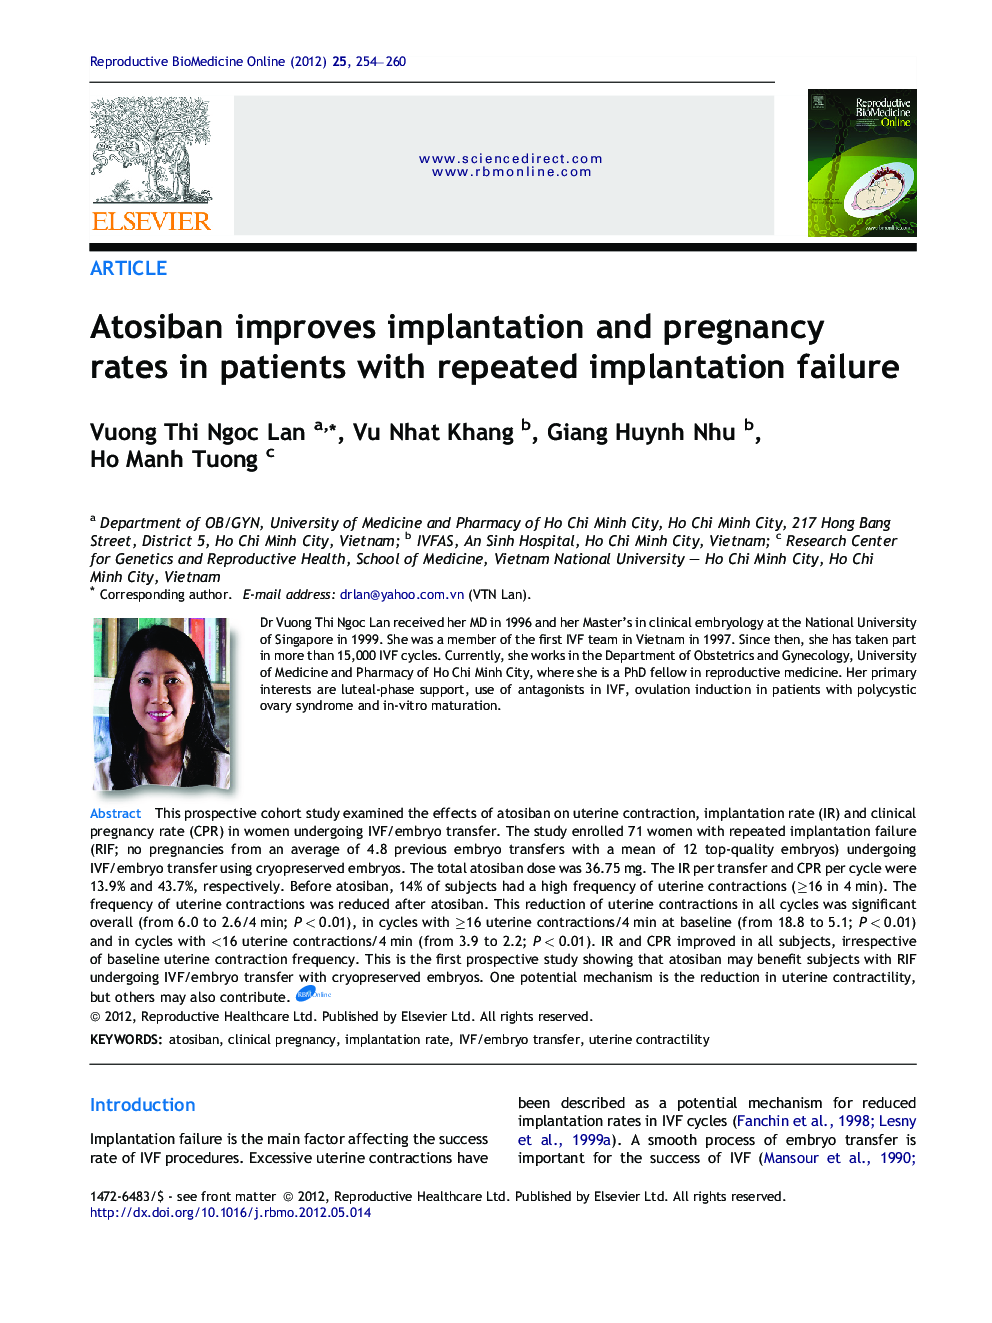 Atosiban improves implantation and pregnancy rates in patients with repeated implantation failure 